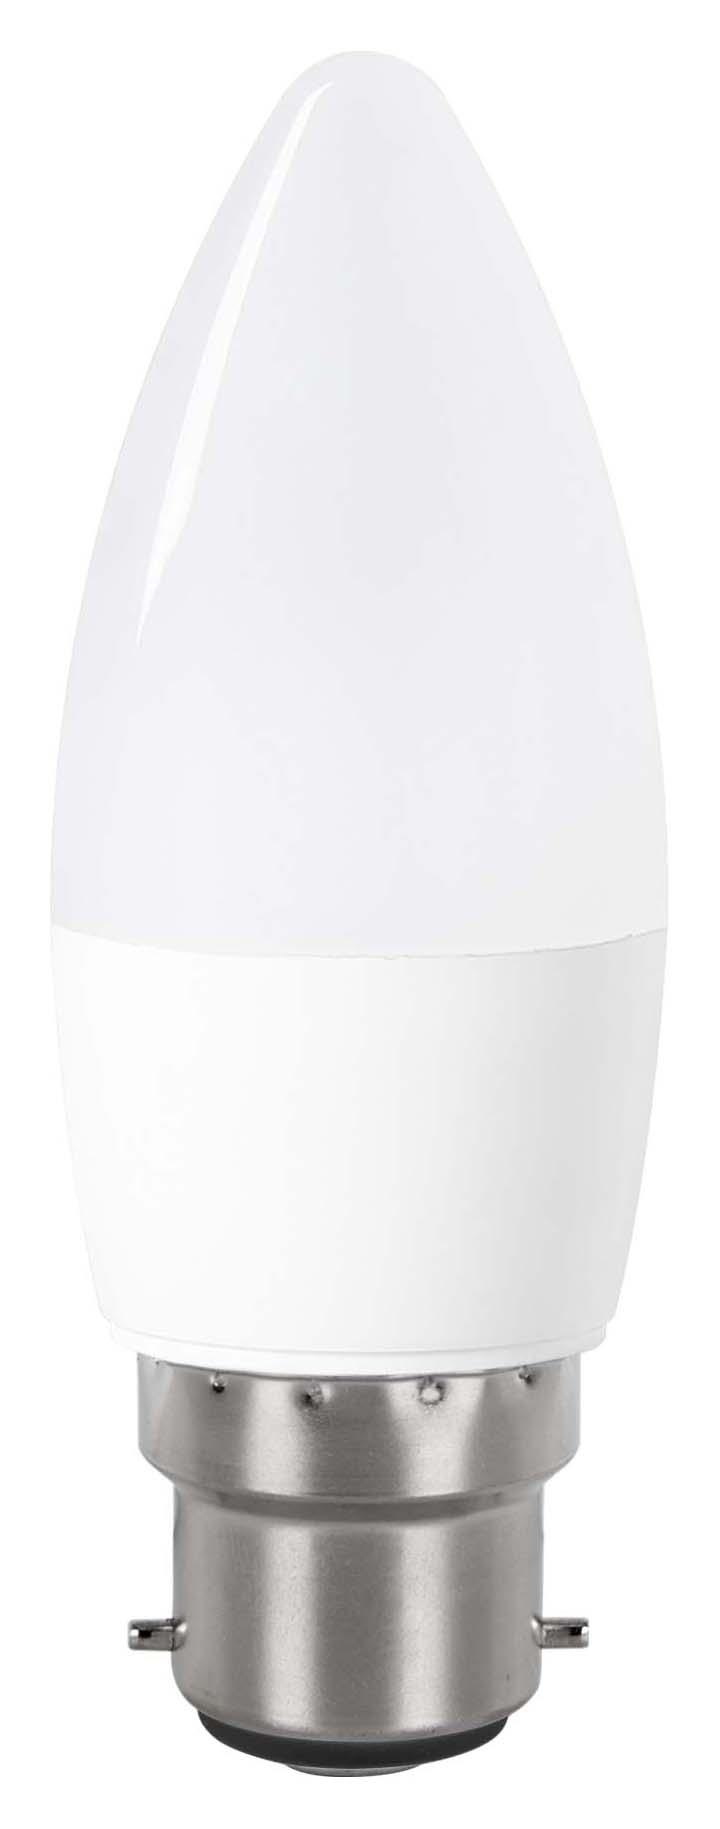 Image of Wickes Dimmable LED B22 Candle 4.9W Warm White Light Bulb